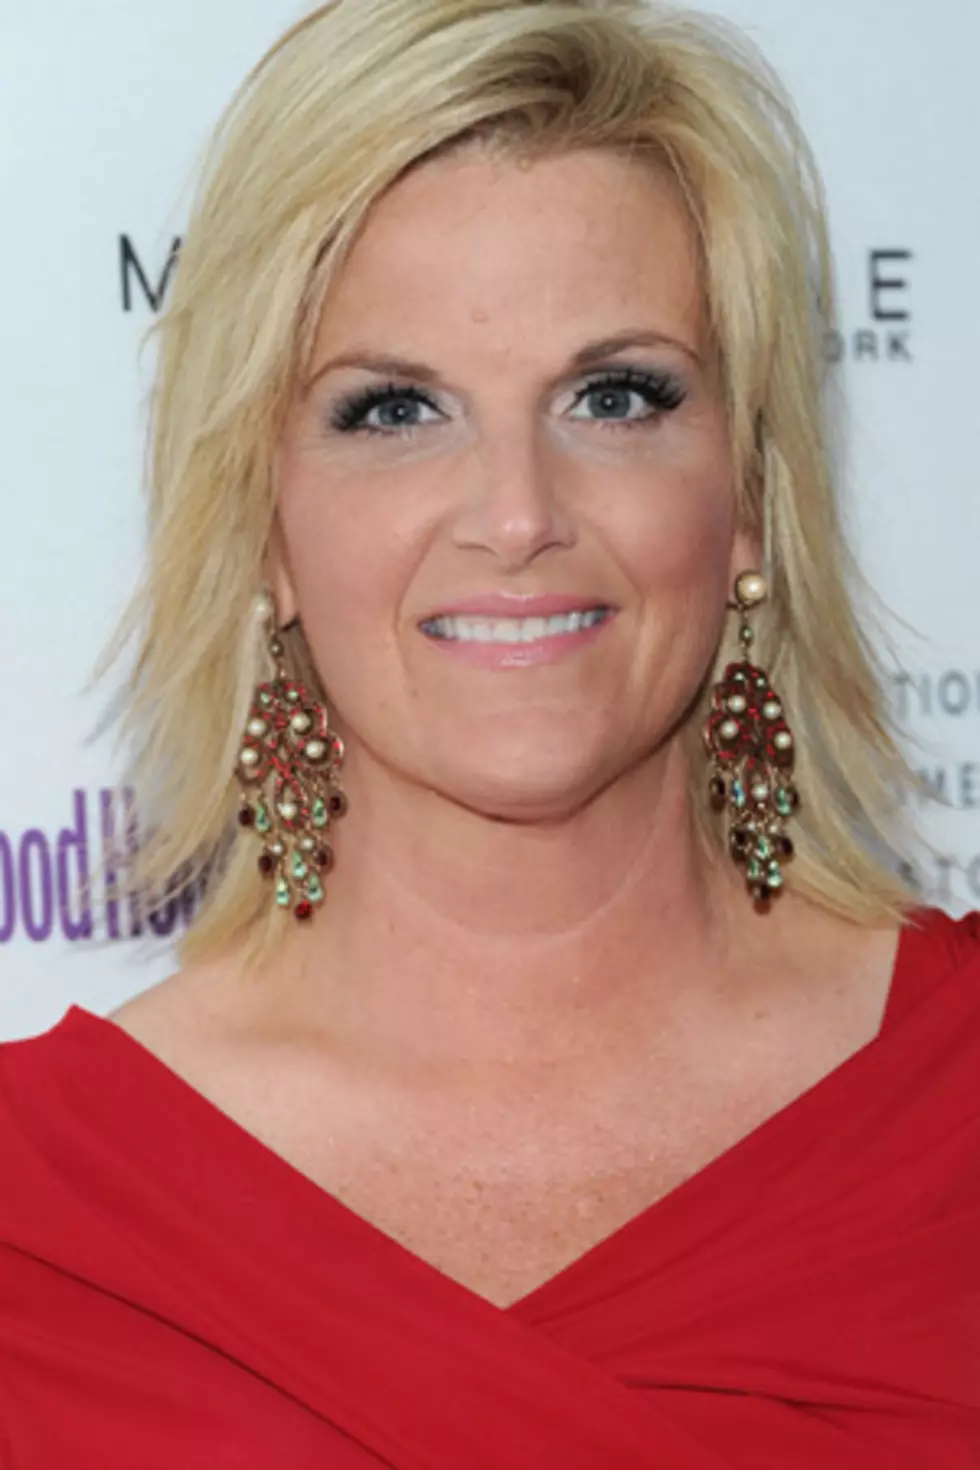 Trisha Yearwood Lands a Cooking Show, Sets Sights on Broadway